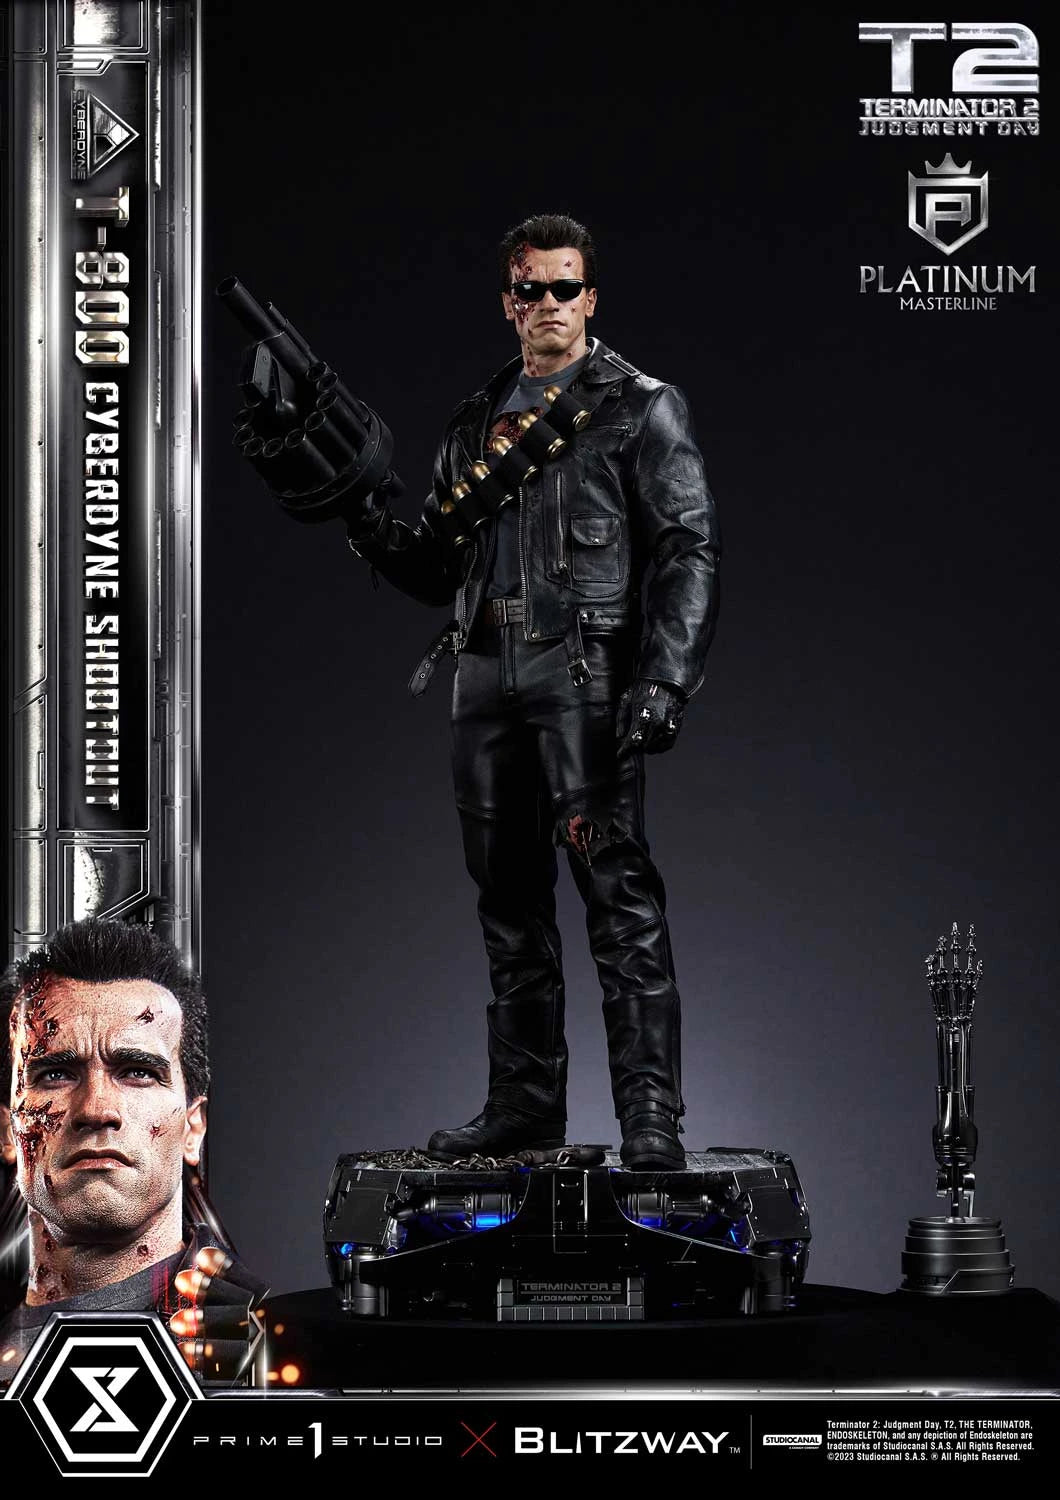 Terminator 2: Judgment Day T-800 Cyberdyne Shootout By Prime 1 Studio